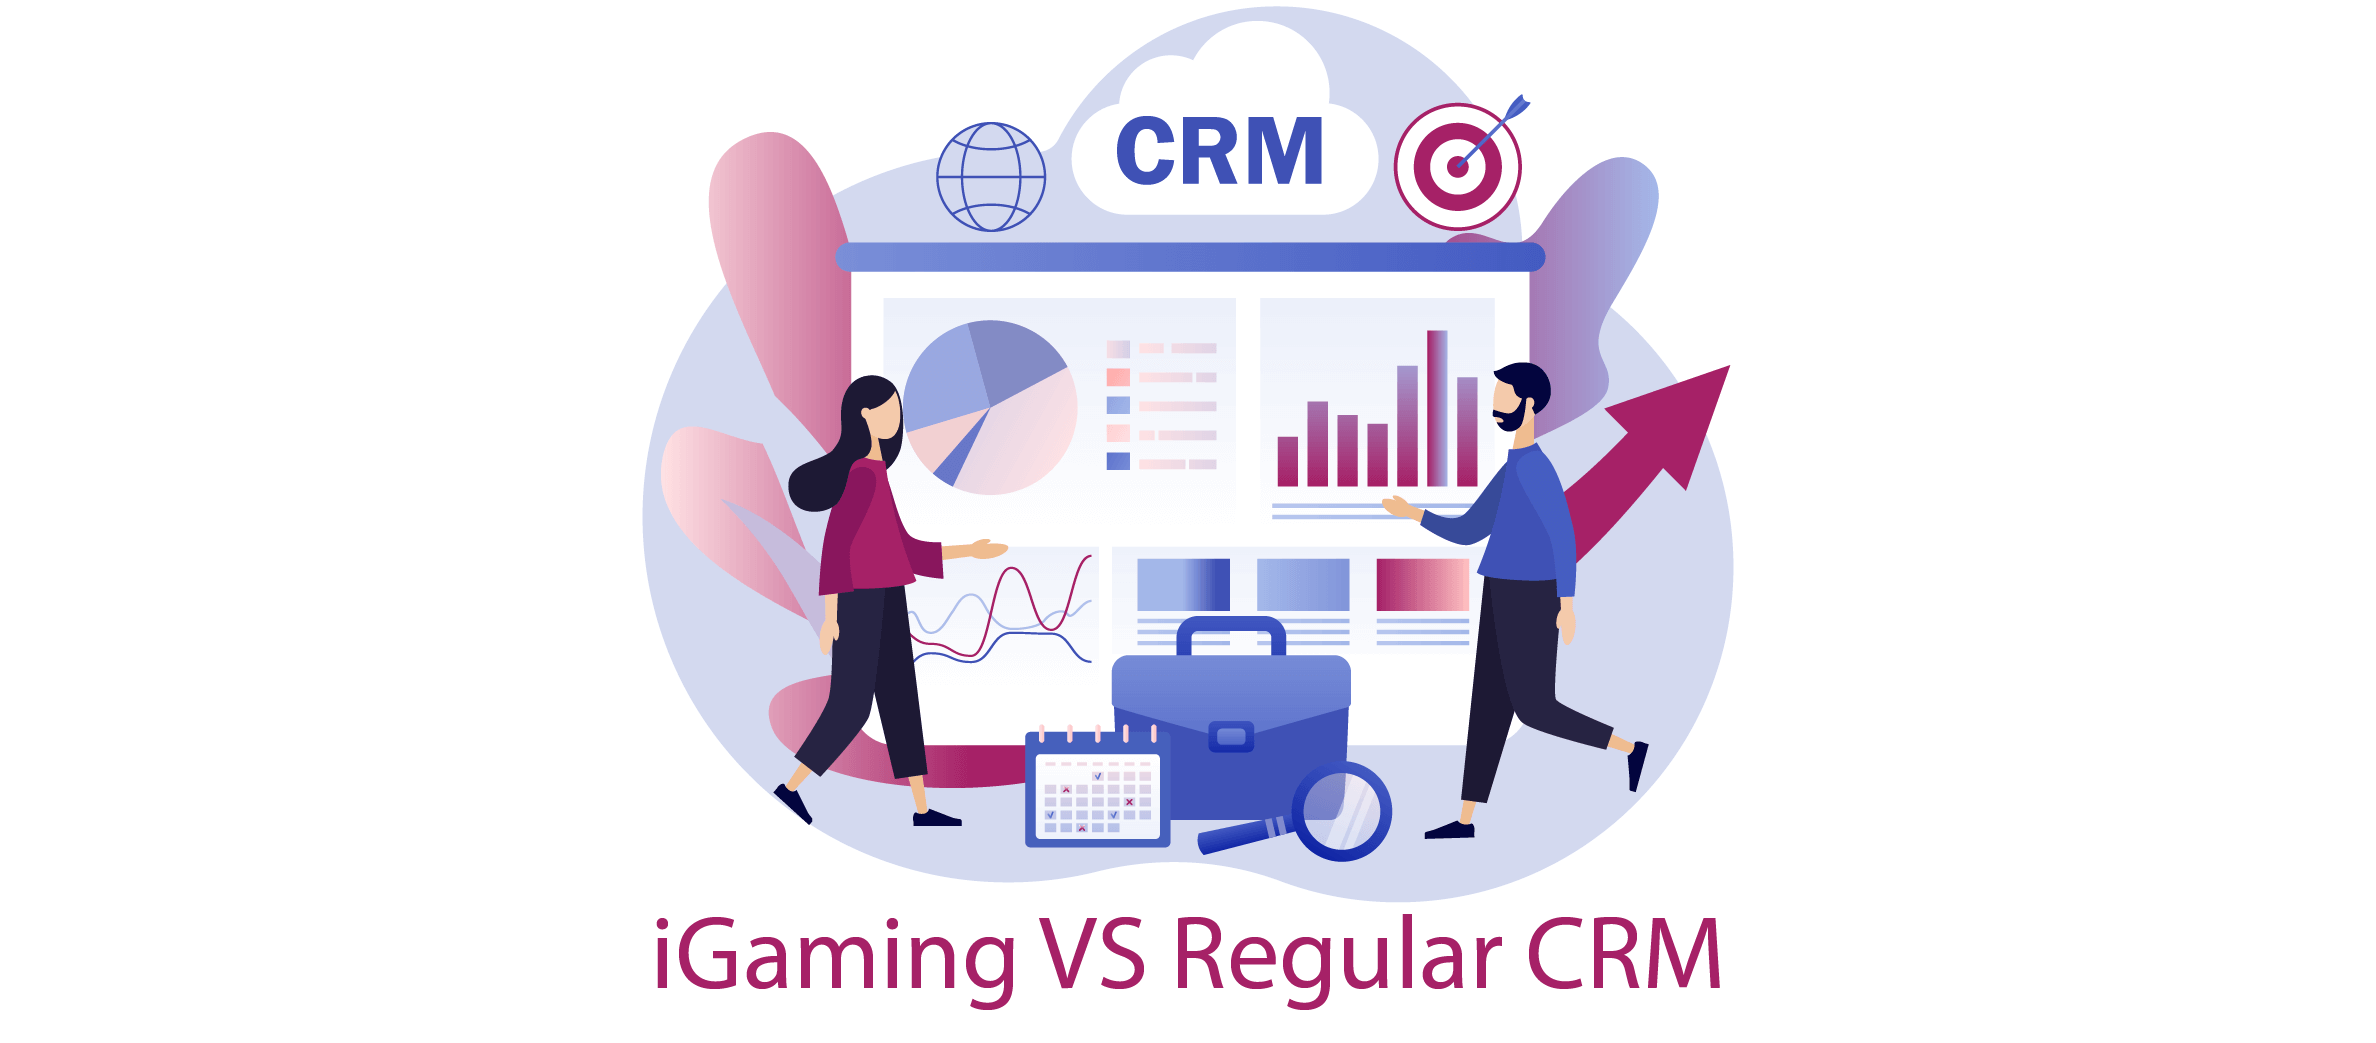 iGaming CRM: What You Need To Know